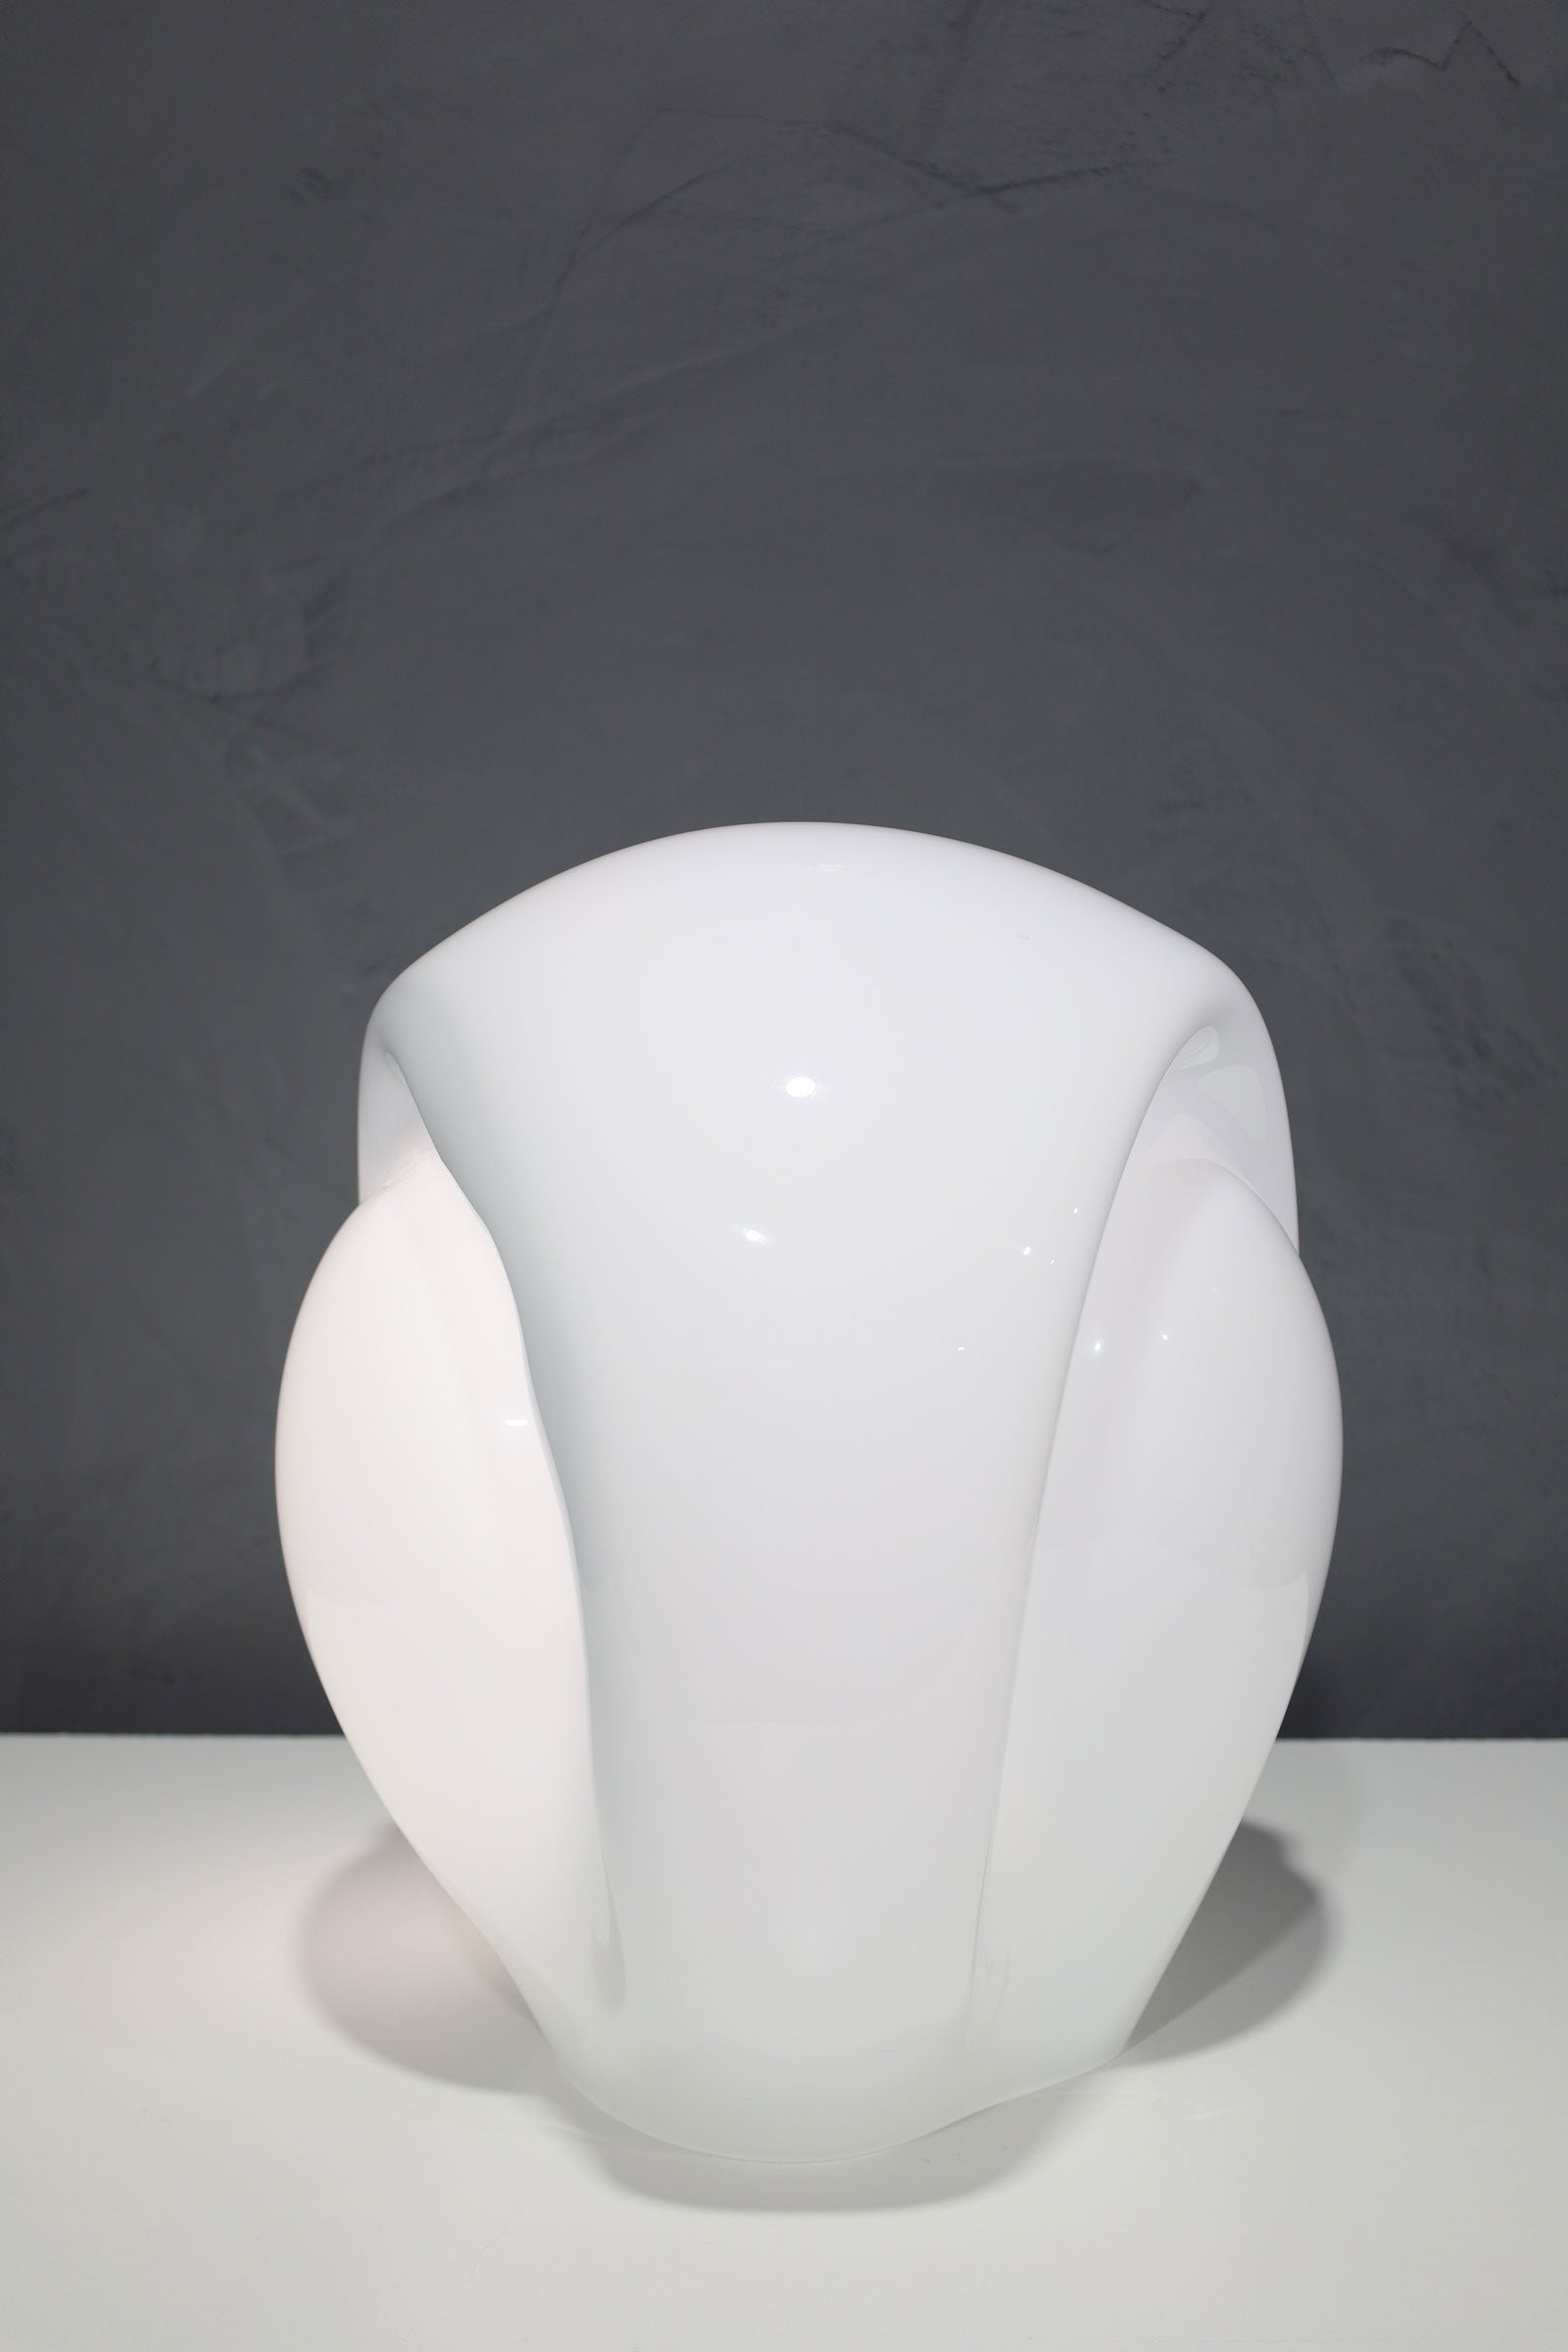 Perfect mood lighting for any room. This lamp is large and resembles a cloud....sometimes called alien head !!.